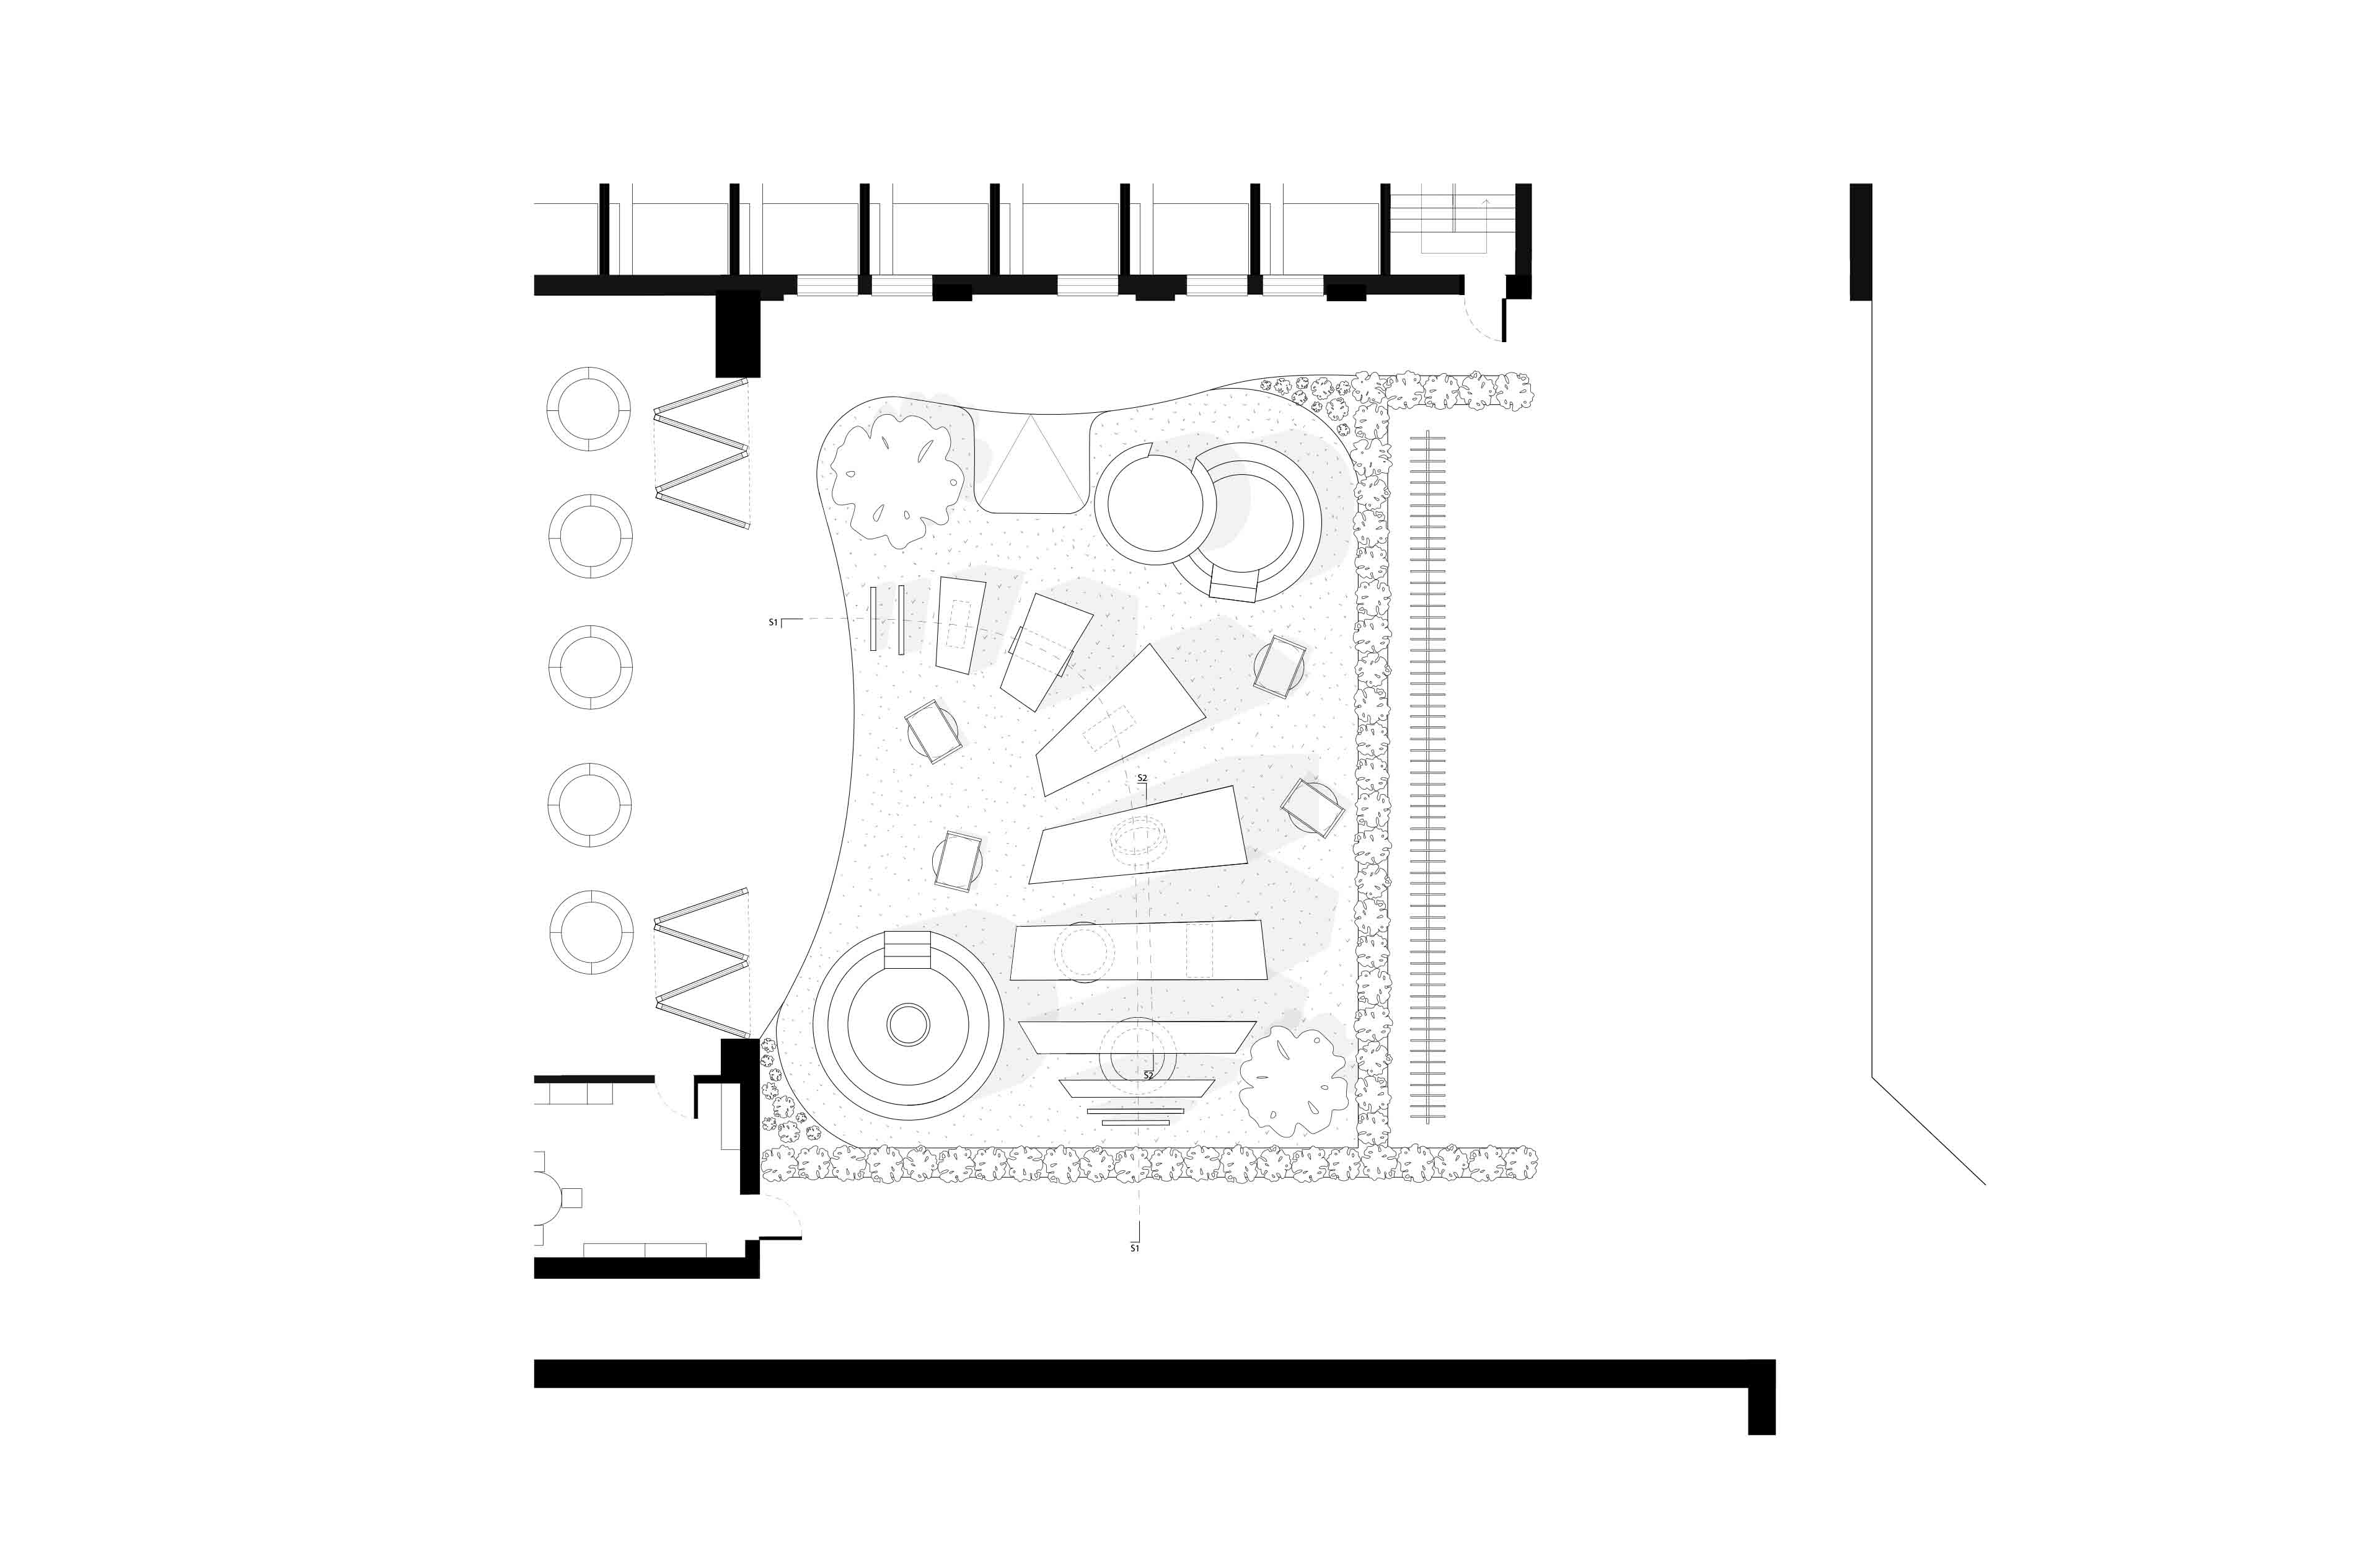 plan view of site